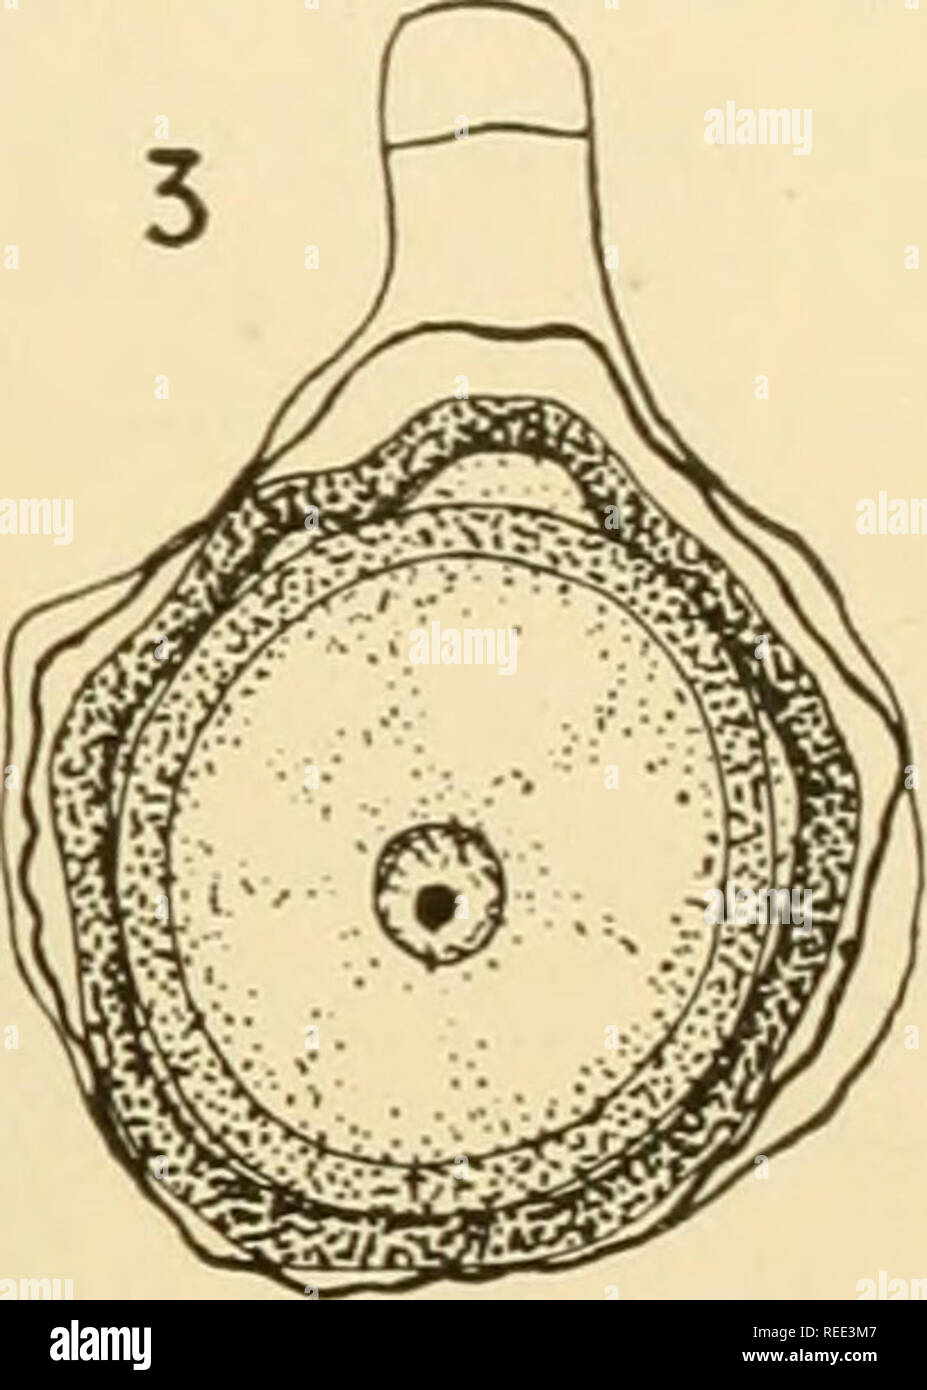 . Comparative morphology of Fungi. Fungi. Fig. 71.—Basidiobolus ranarum. Development of zygospores. 1. Nuclei resting in the beaks with a pore already formed between the latter. 2. Completed plasmogamy. 3. Mature zygospores. (X 990; after Fairchild, 1897.) above and below, rostrate processes which approach and develop approxi- mately to one-half the cross section of the sporiferous hyphae (Fig. 71, 1). Both nuclei migrate into the beak and divide. Each daughter nucleus, cut off at the tip by a more or less marked septum, degenerates. Both other nuclei migrate basipetally. Meanwhile a pore is f Stock Photo